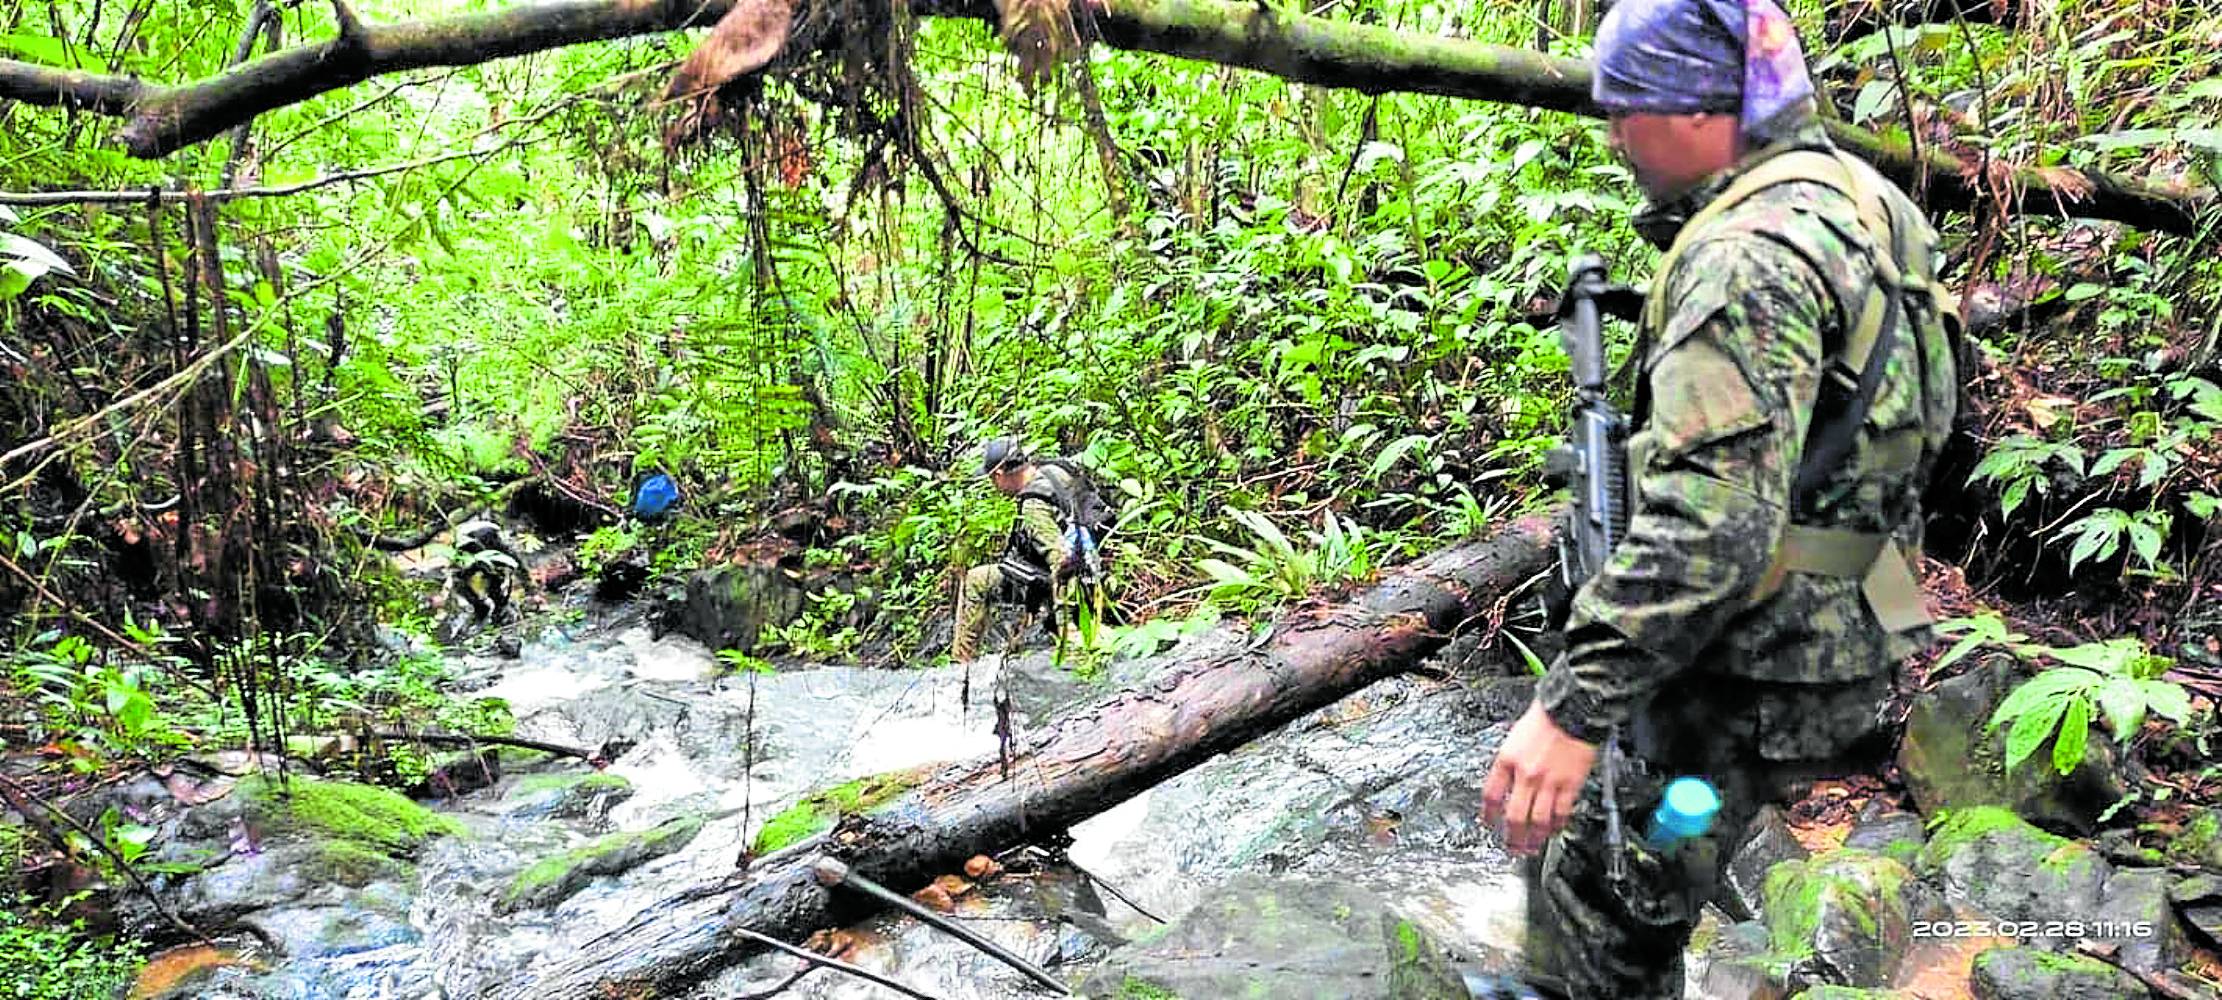 Members of the team searching for the crash site of a Cessna plane that went missing on Jan. 24 in the Sierra Madre mountains go deep into the forests of Divilacan, Isabela, amidunpredictable weather, to find the aircraft’s wreckage.